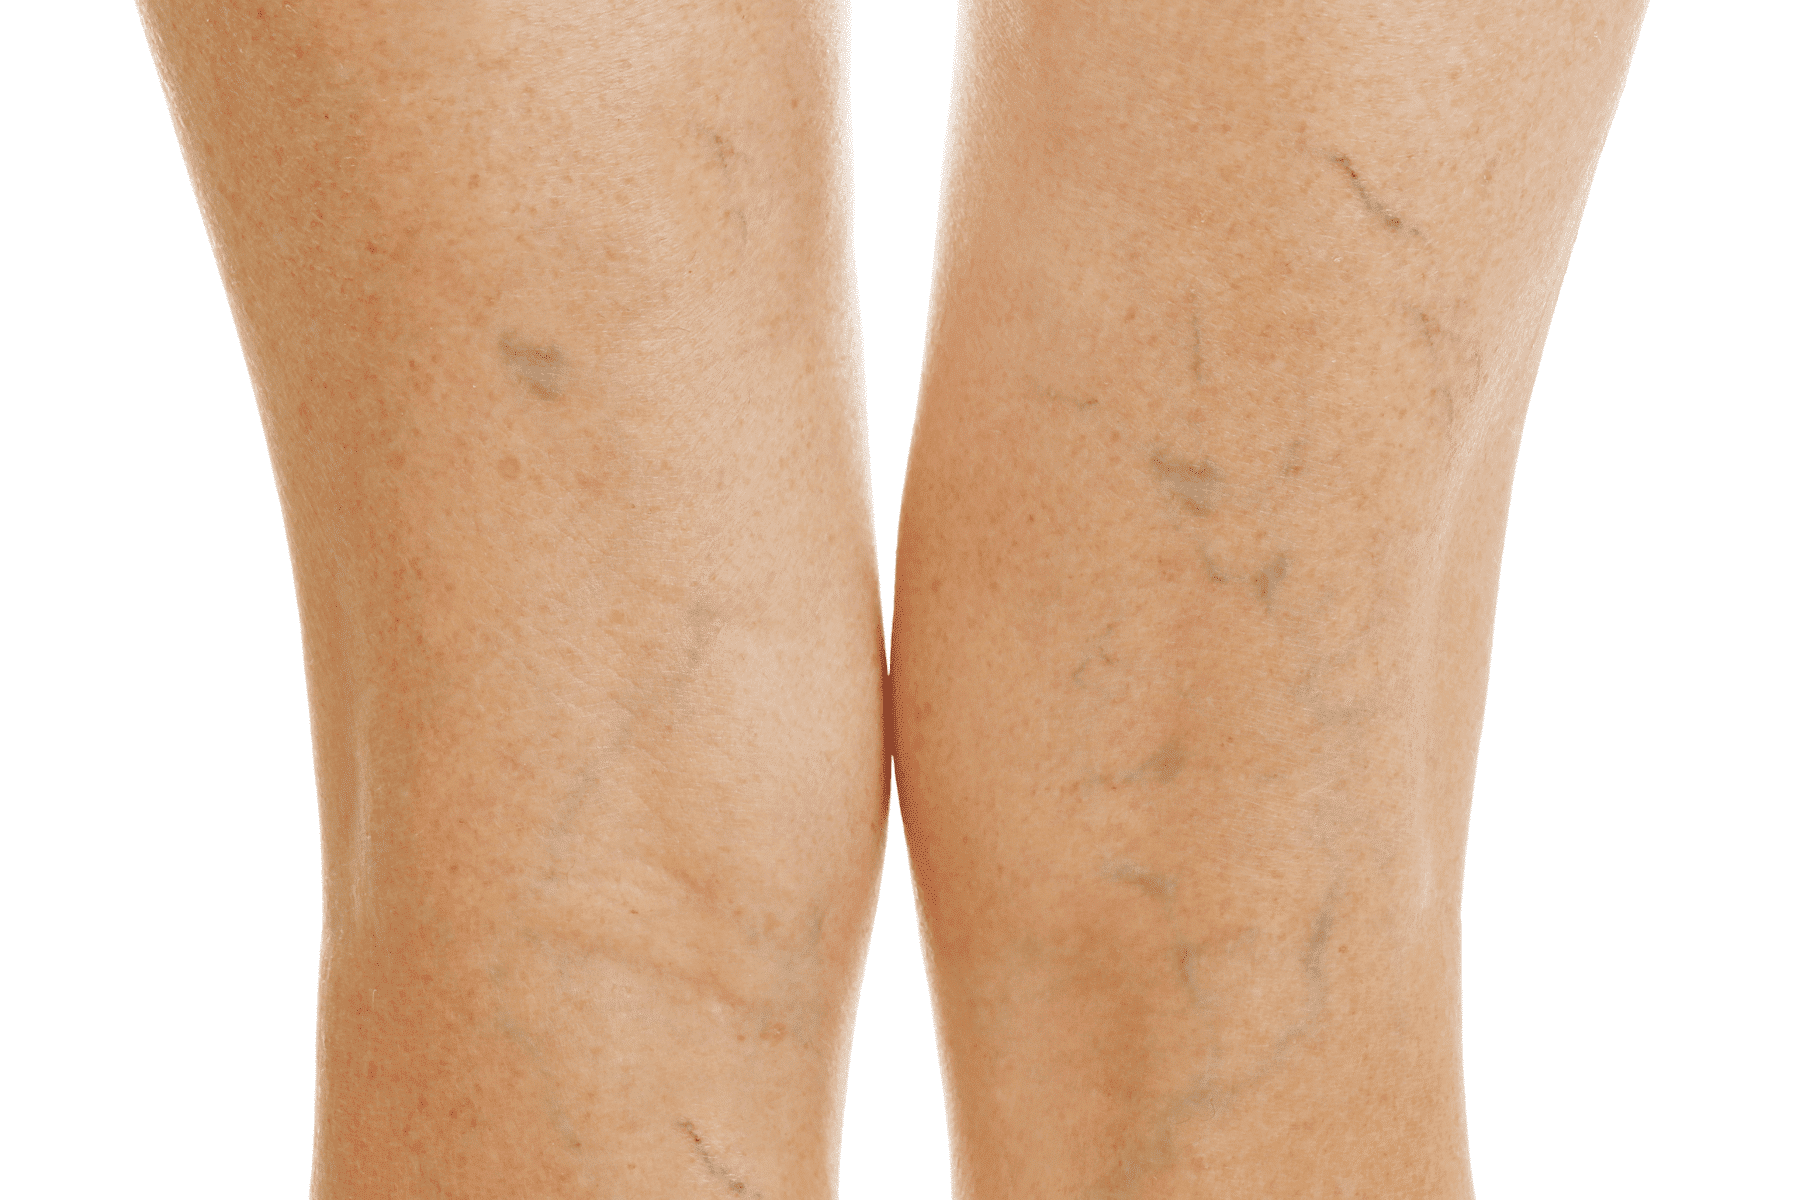 Small surface veins are often treated with sclerotherapy.